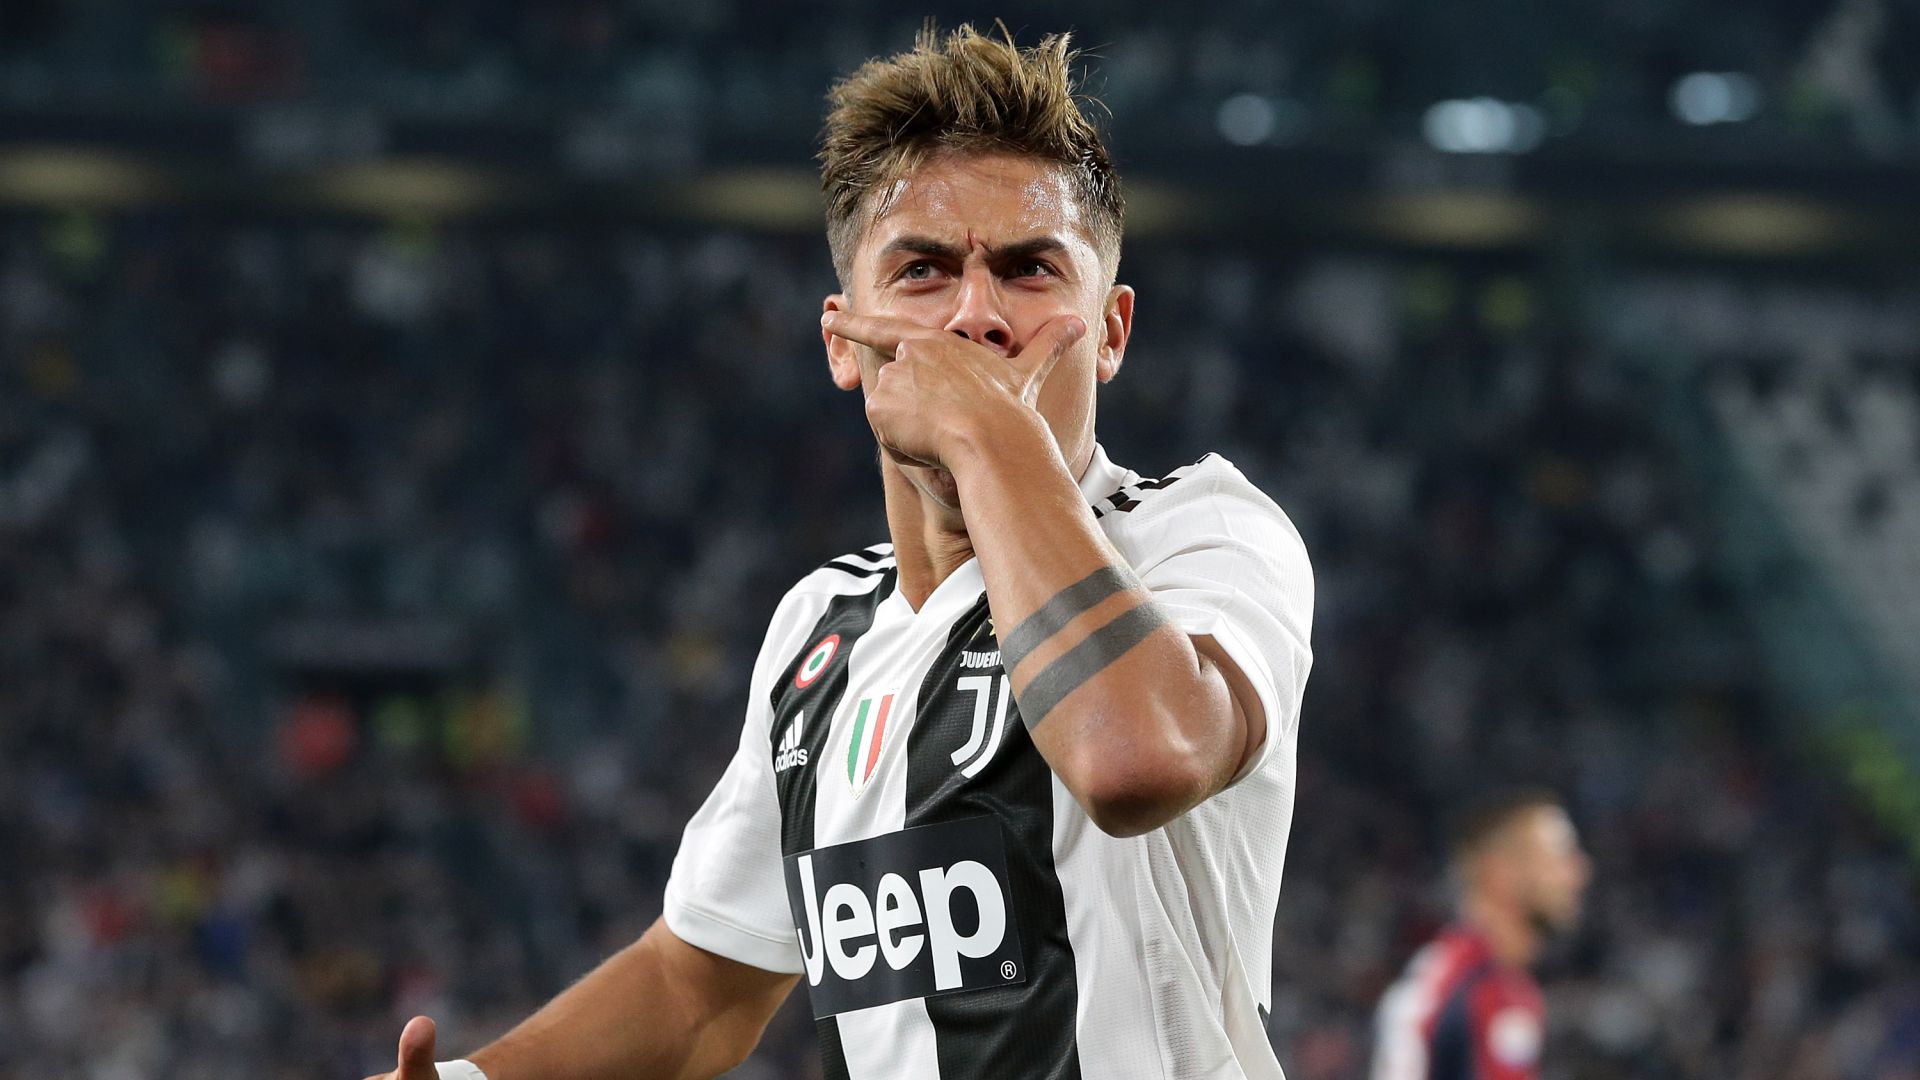 Manchester United 'pressing' to sign Juventus forward Paulo Dybala and more transfer rumours - Bóng Đá